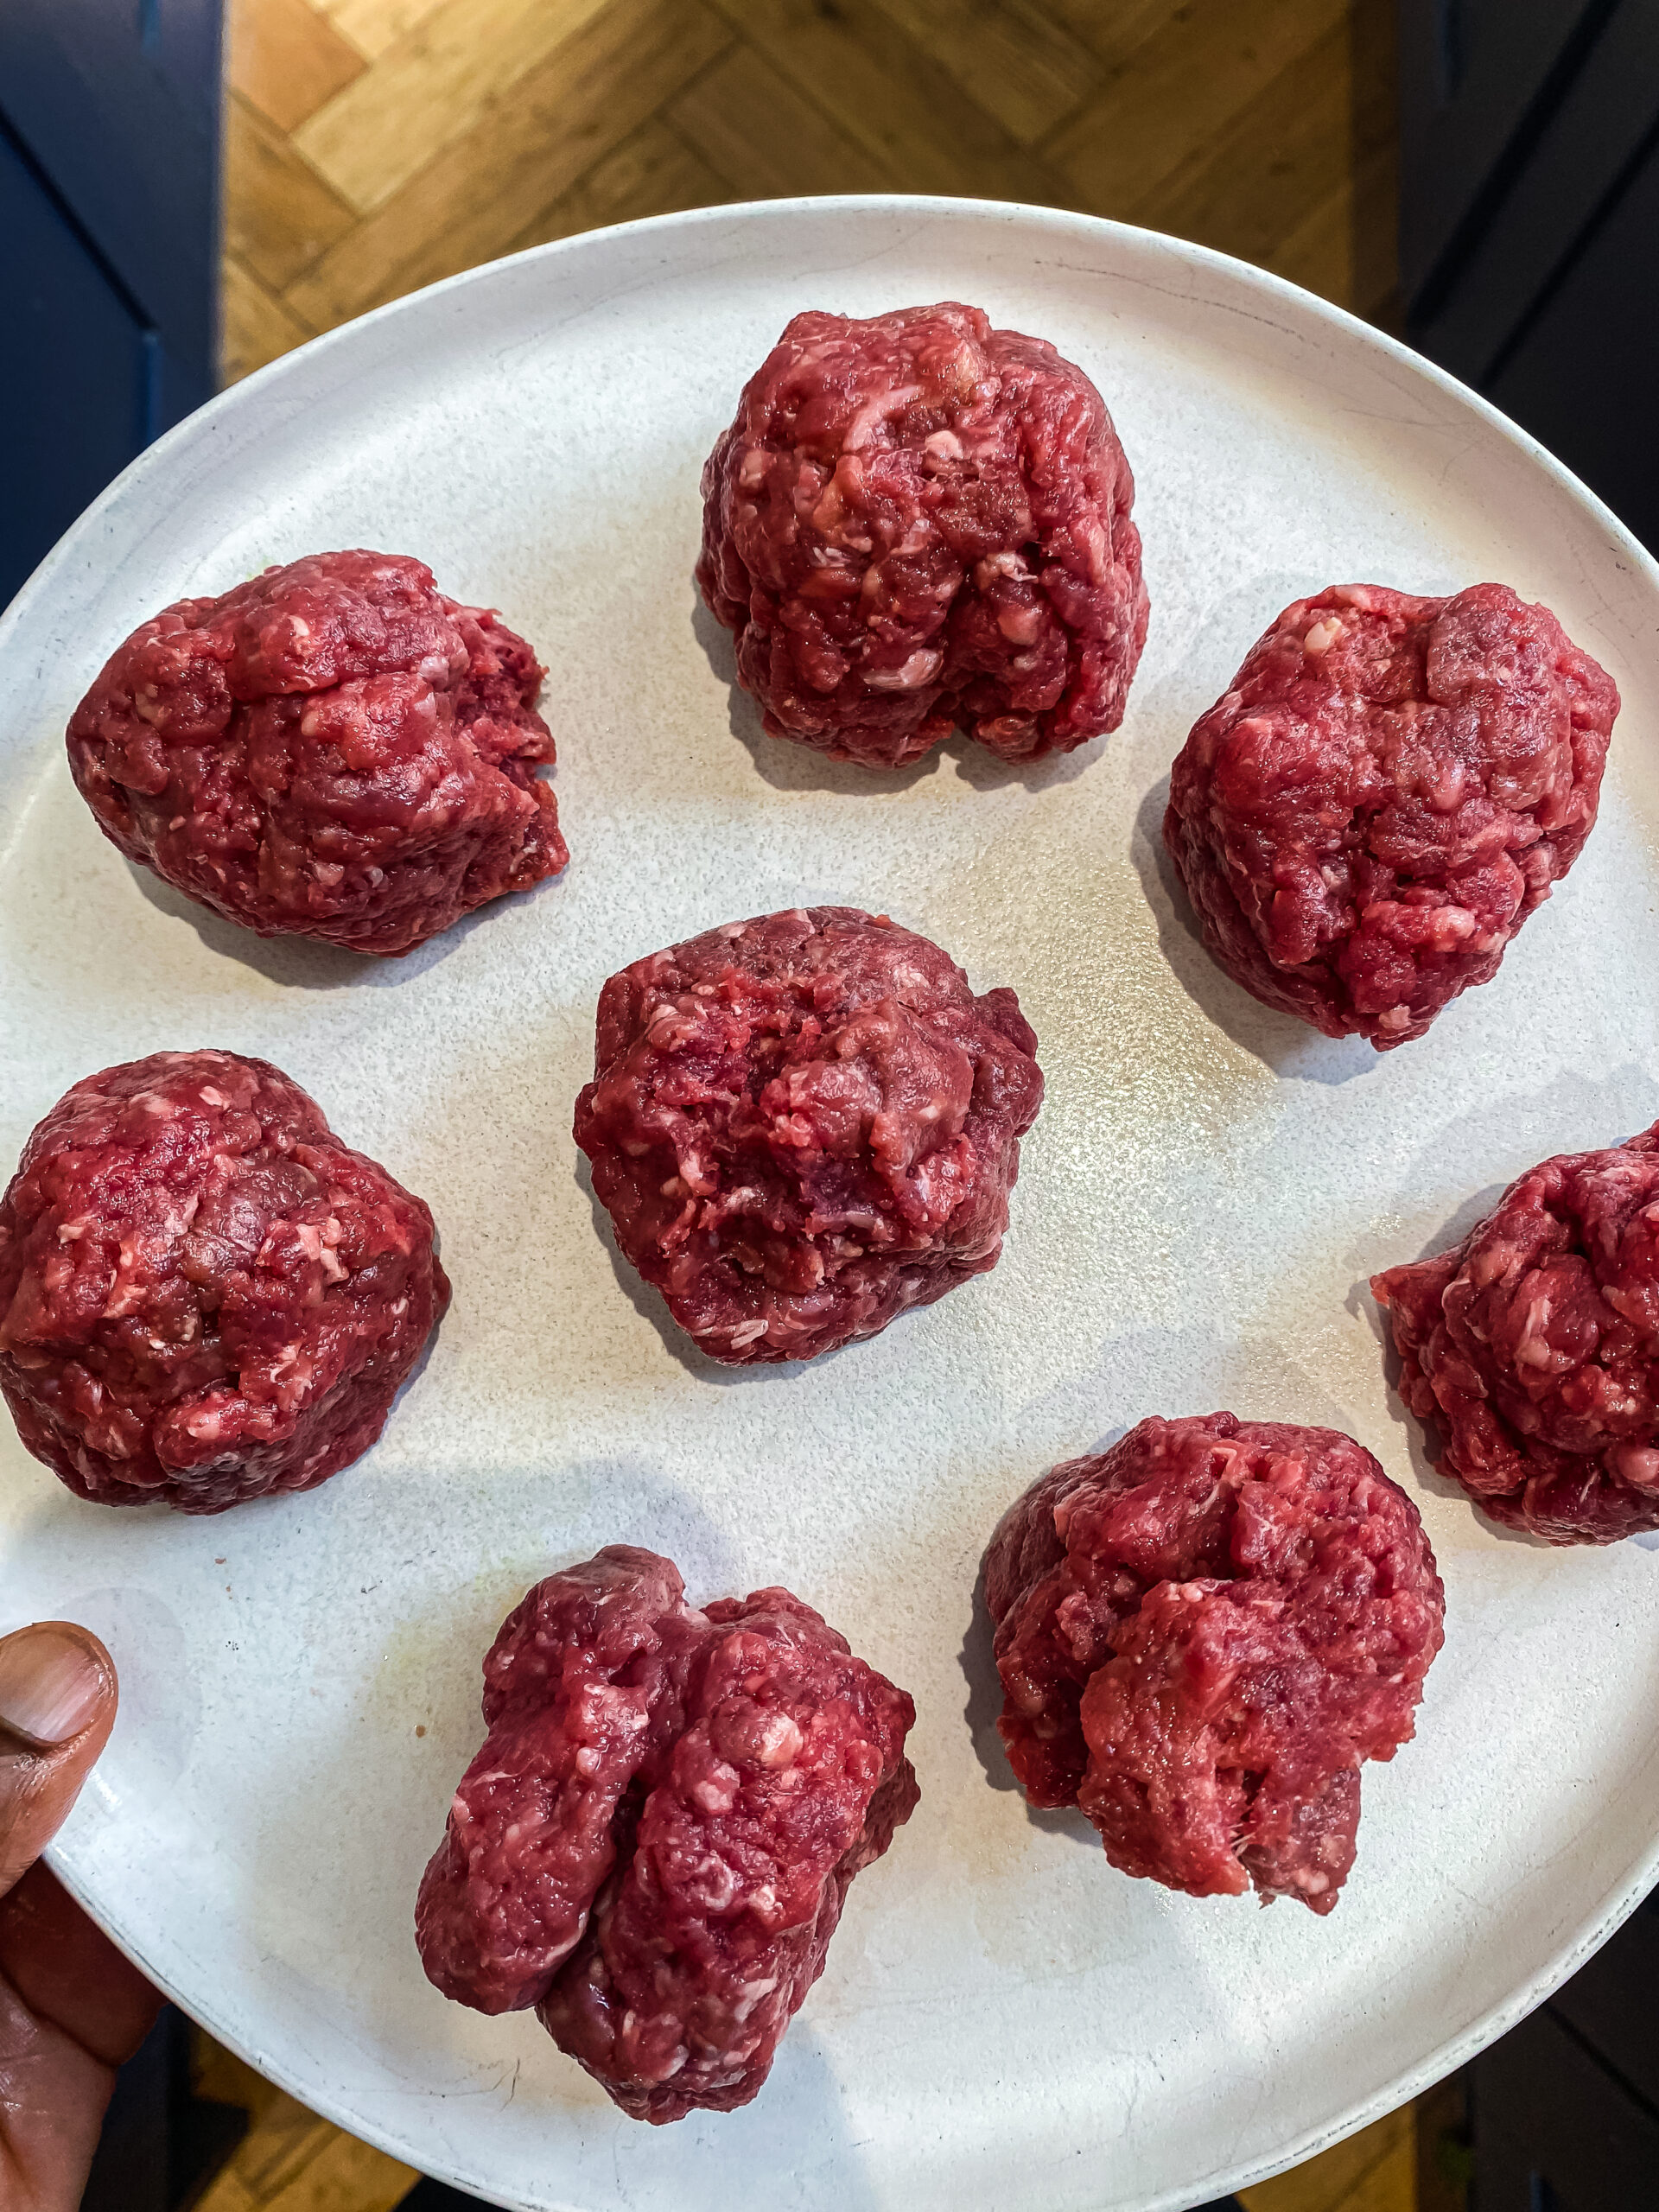 Prepping the beef in balls